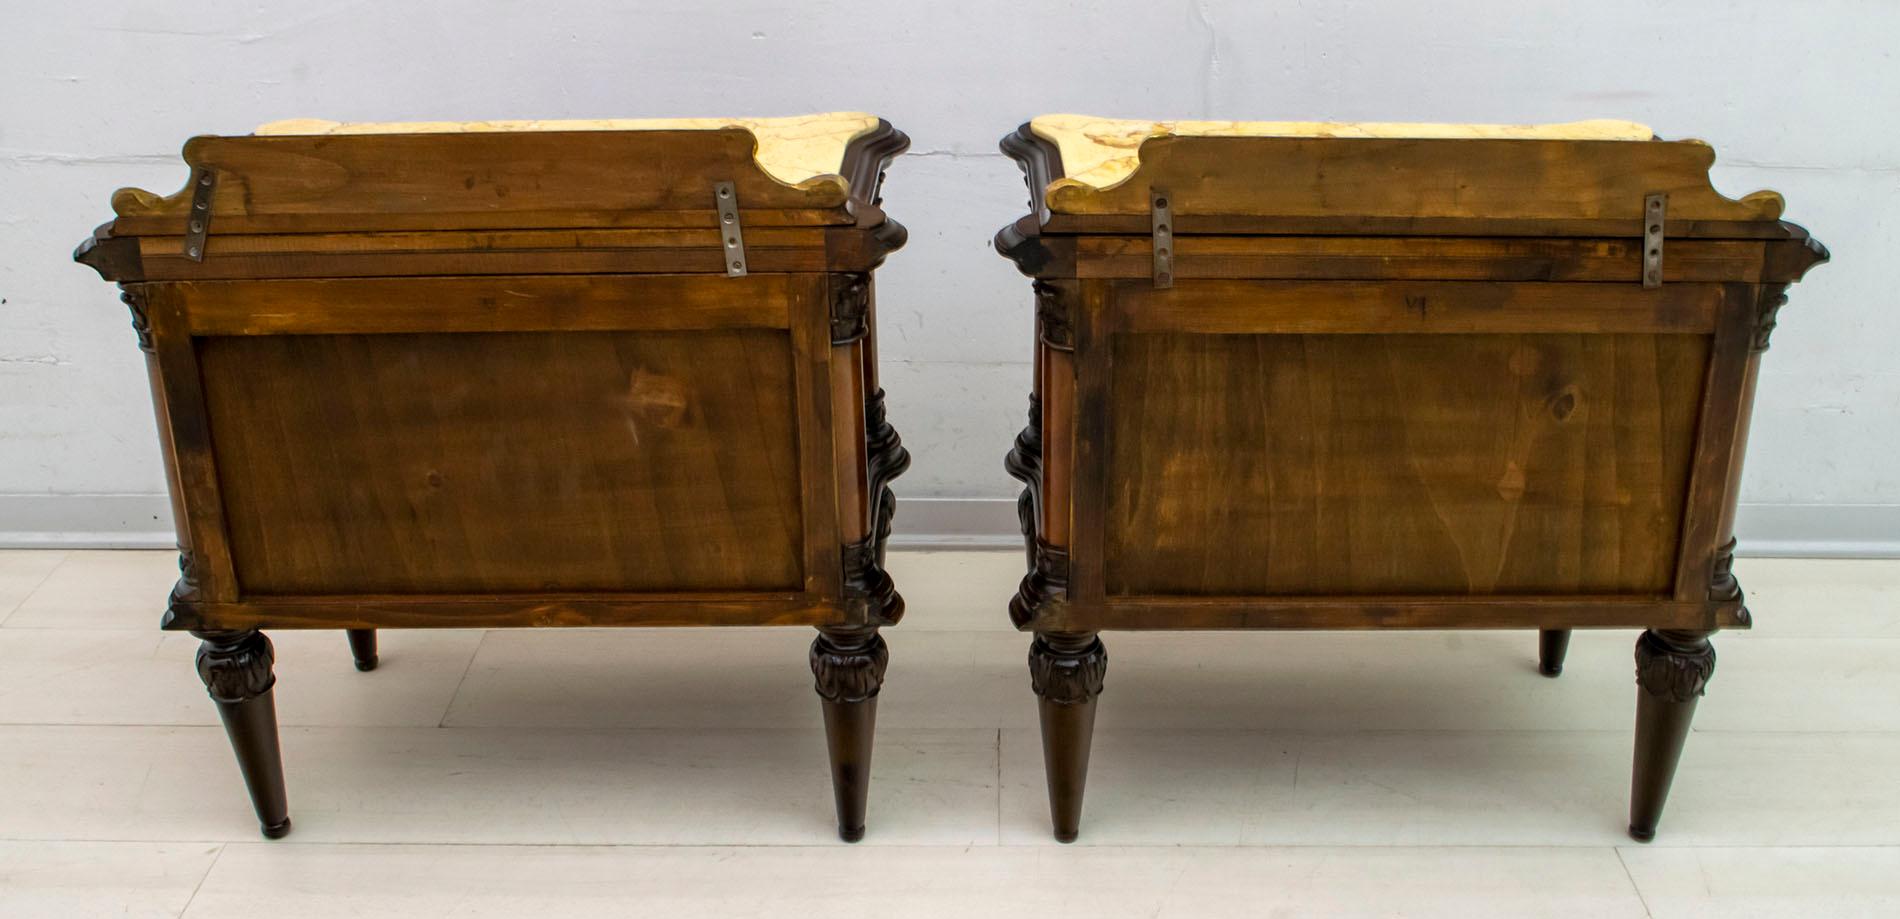 Pair of Midcentury Italian Walnut and Cream Valencia Marble Night Stands, 1940s For Sale 9